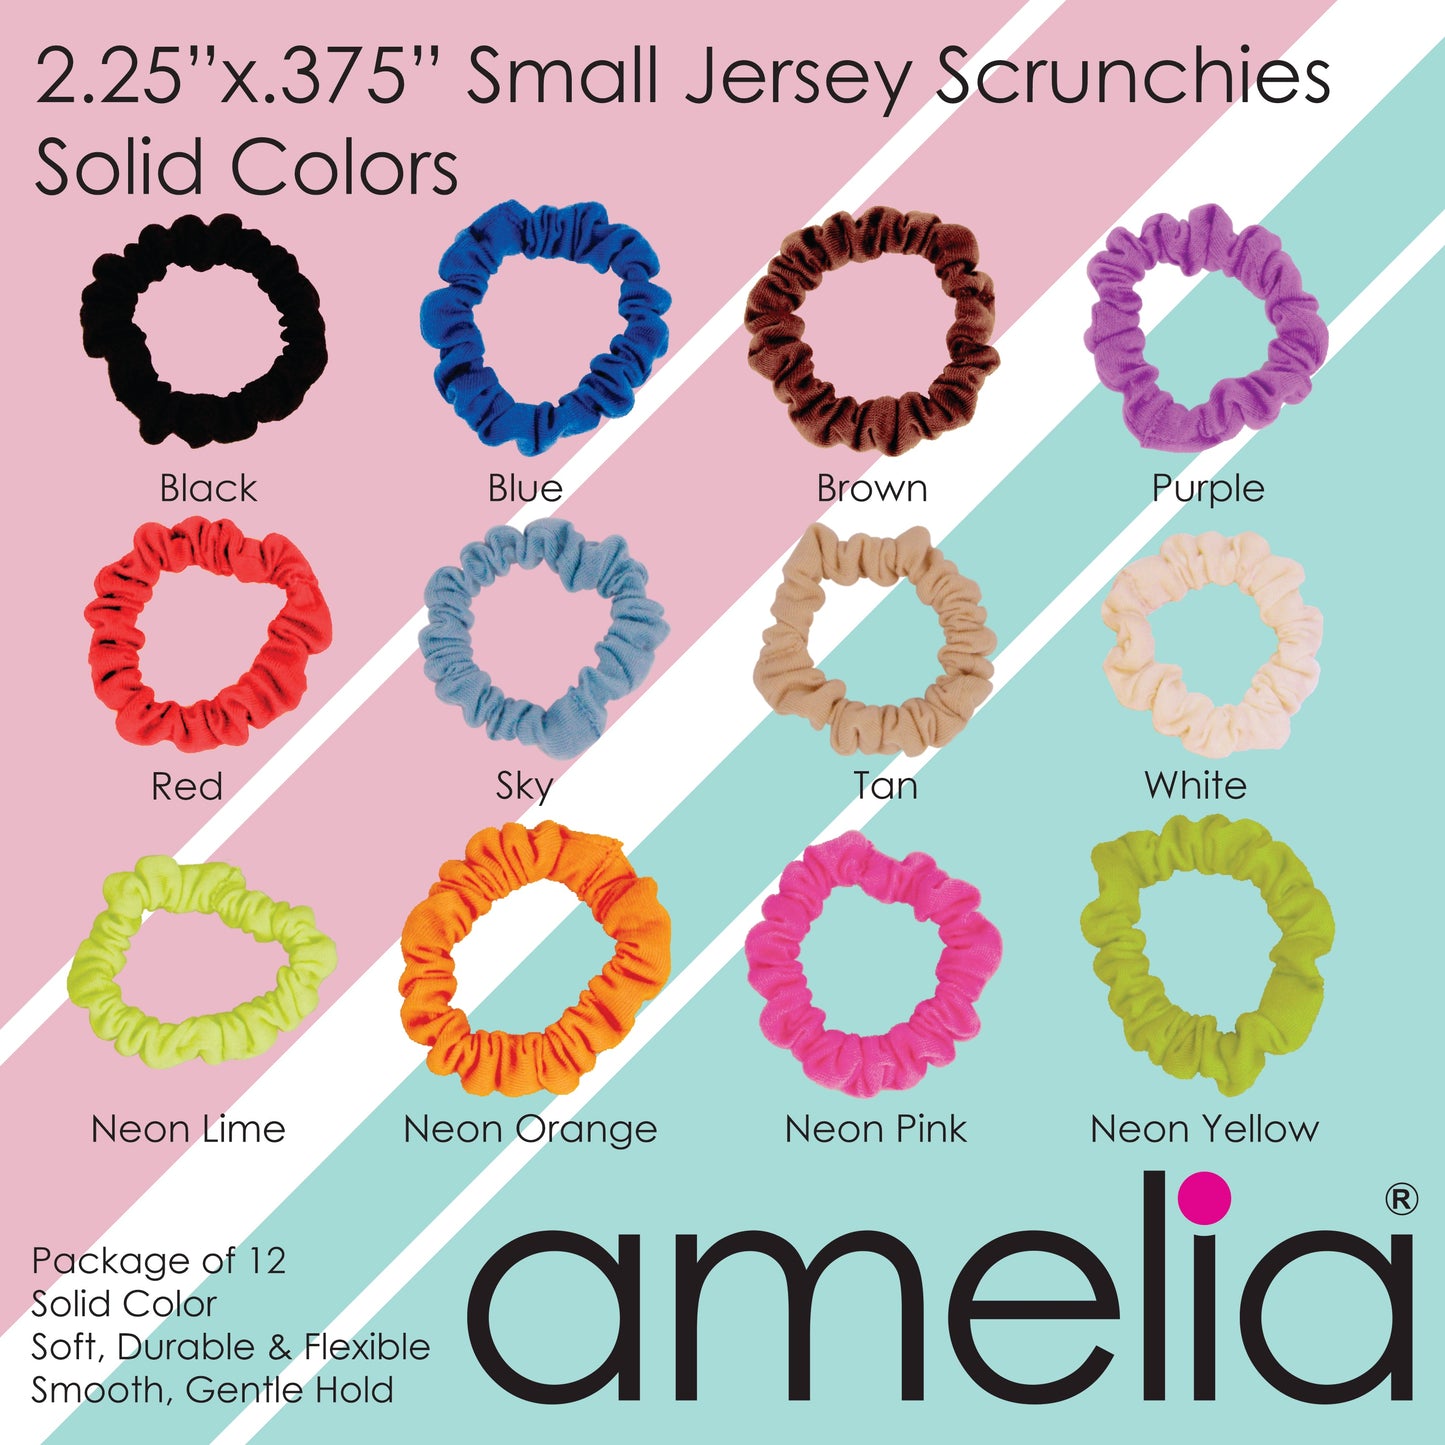 Amelia Beauty, Neon Yellow Jersey Scrunchies, 2.25in Diameter, Gentle on Hair, Strong Hold, No Snag, No Dents or Creases. 12 Pack